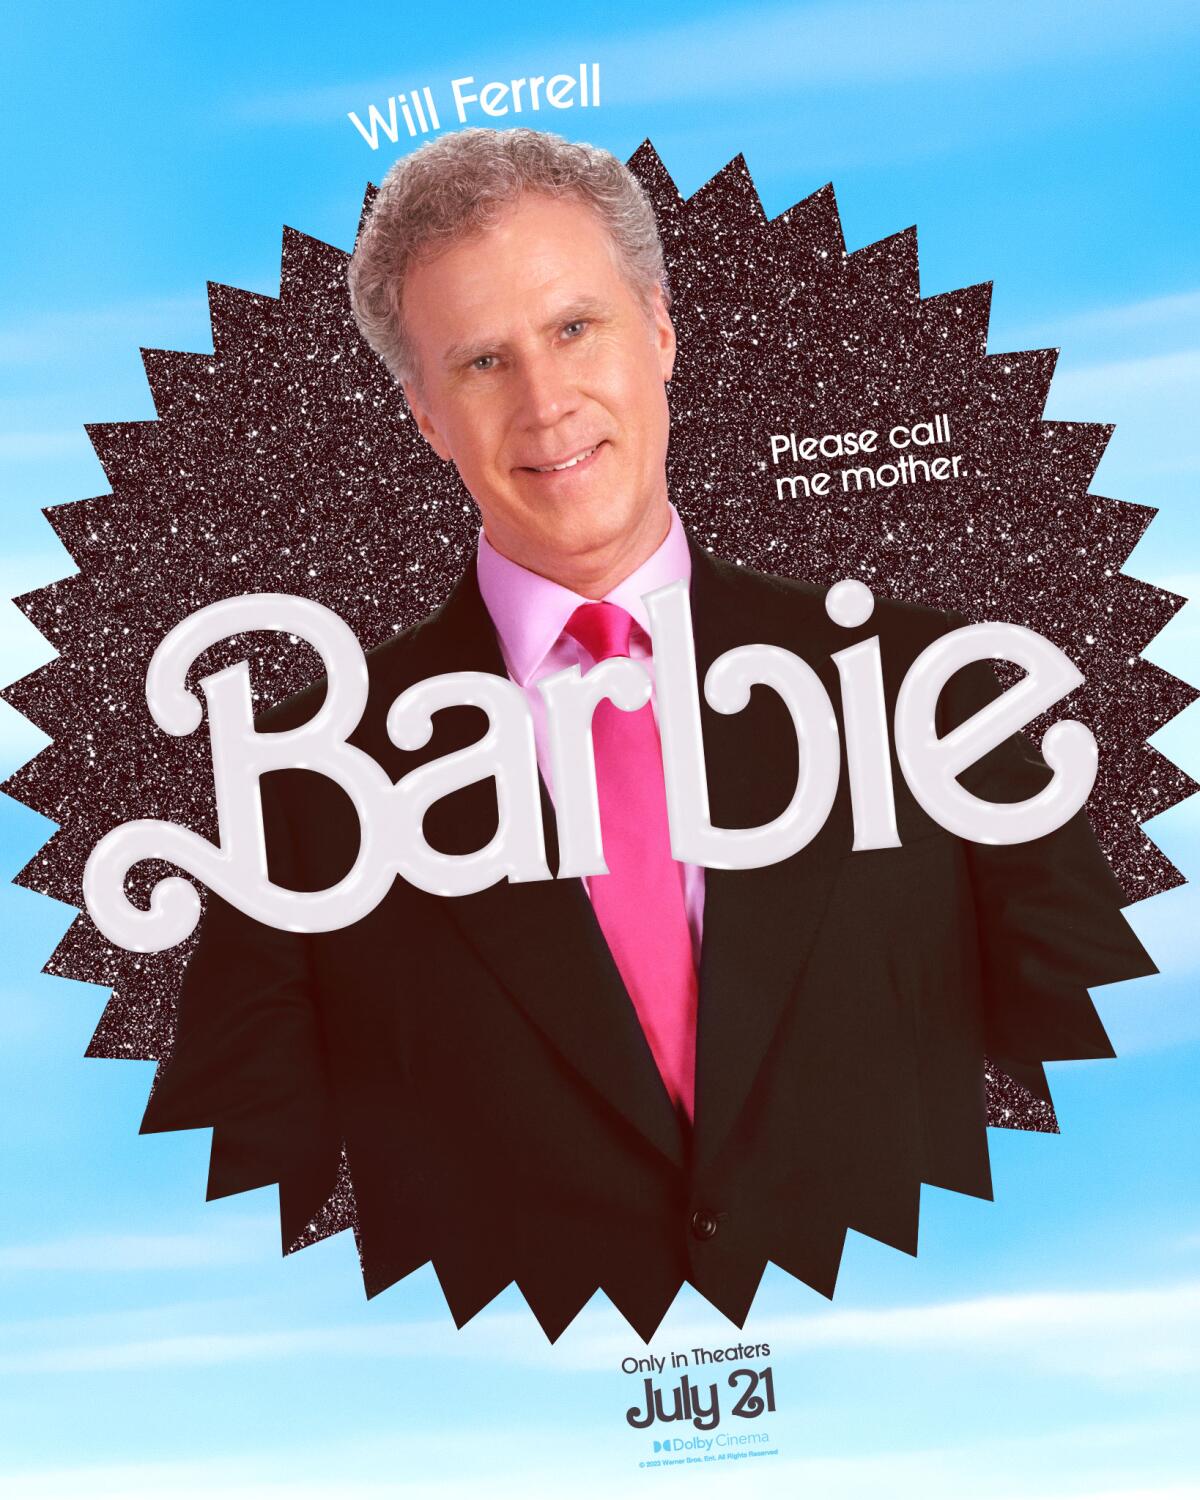 Will Ferrell smiles in a "Barbie" movie poster. He wears a black suit and pink tie.